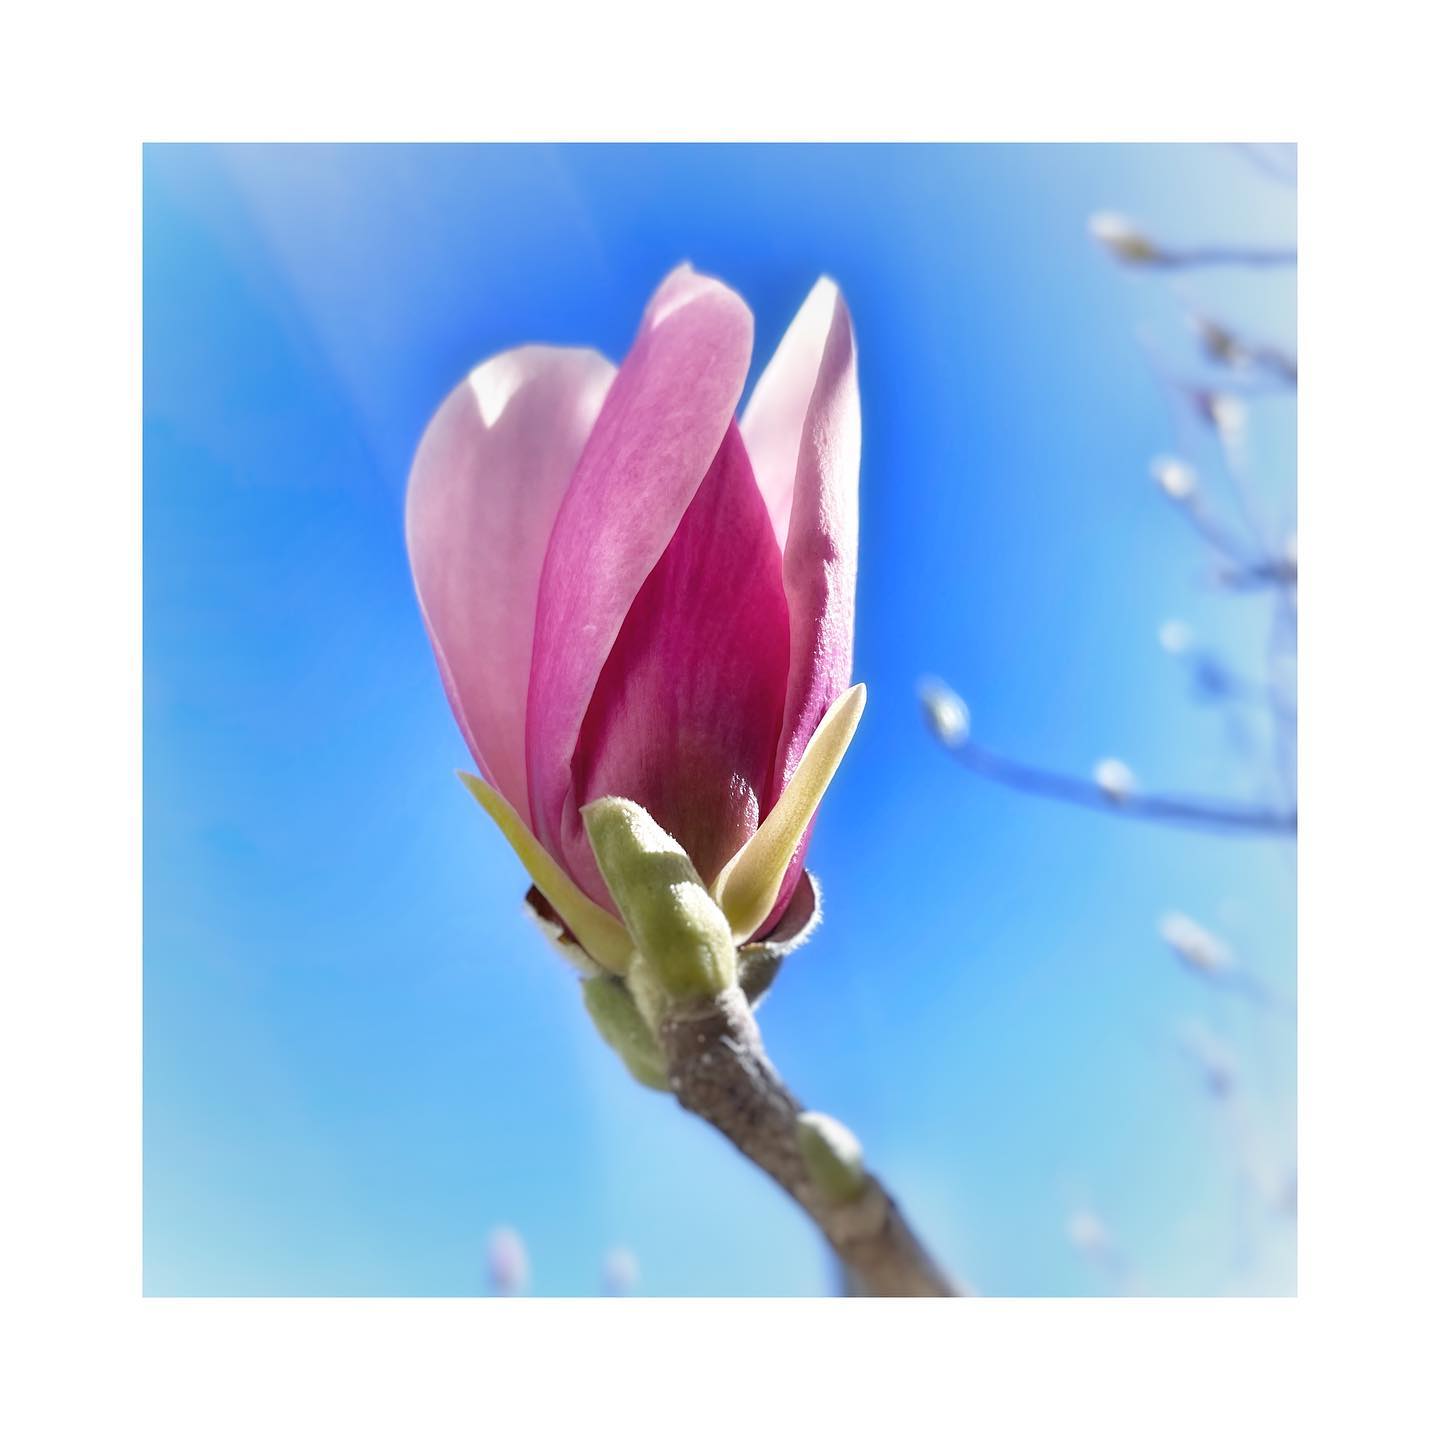 Spring is coming #spring #flowers #magnolia #bluesky